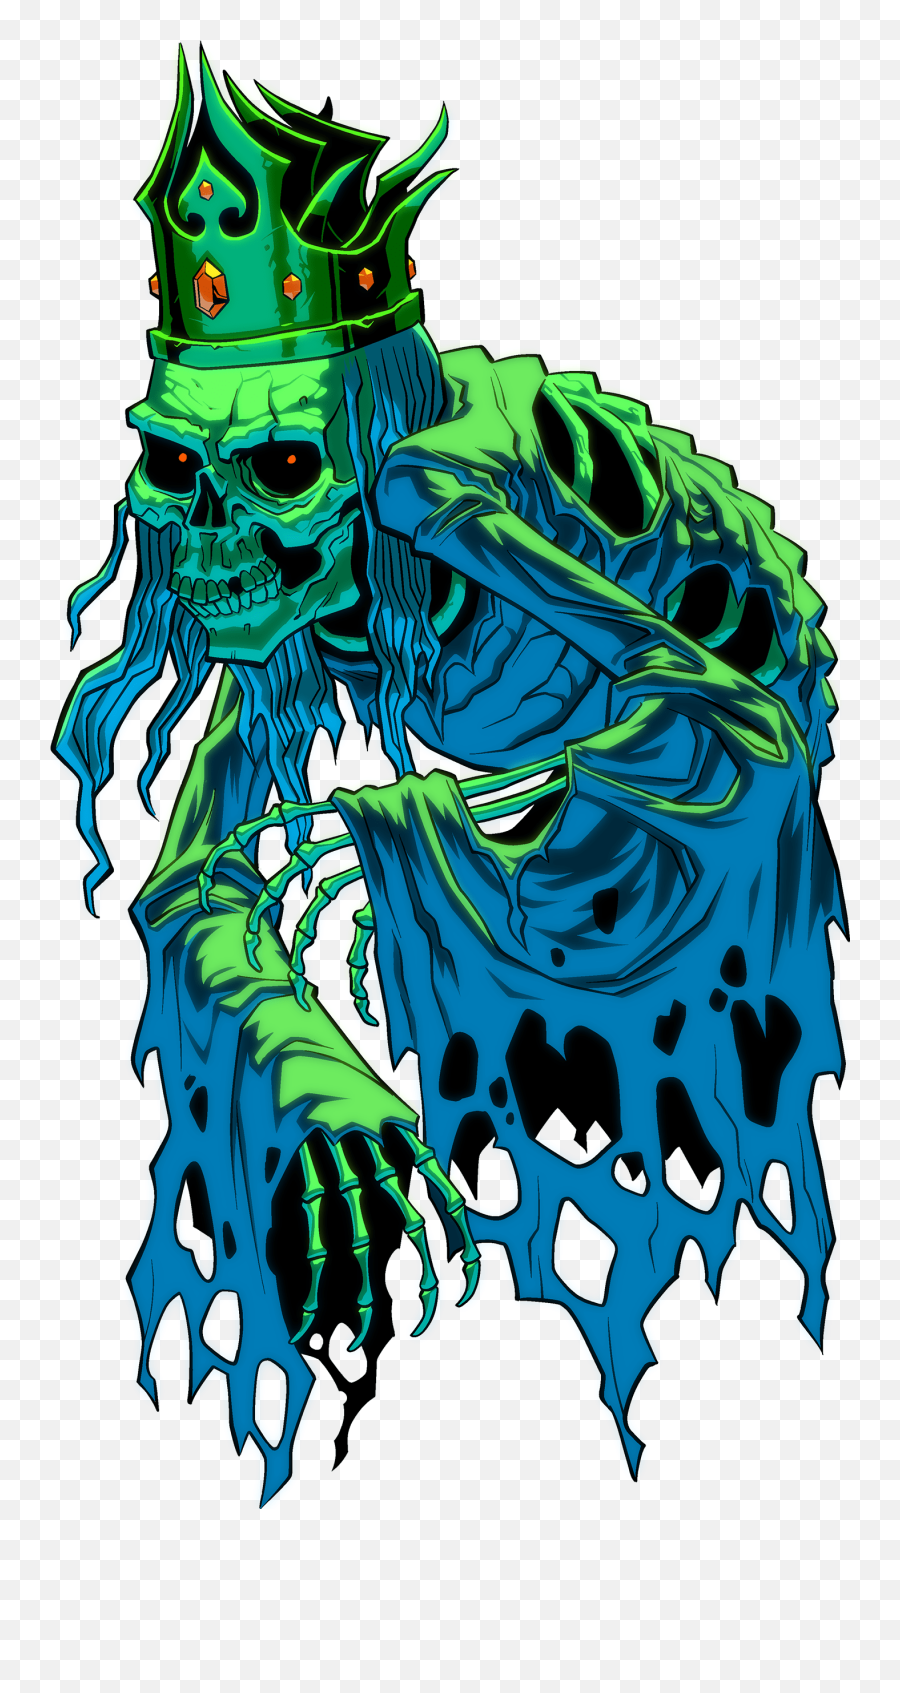 Lich King - Illustration Png,Lich King Png